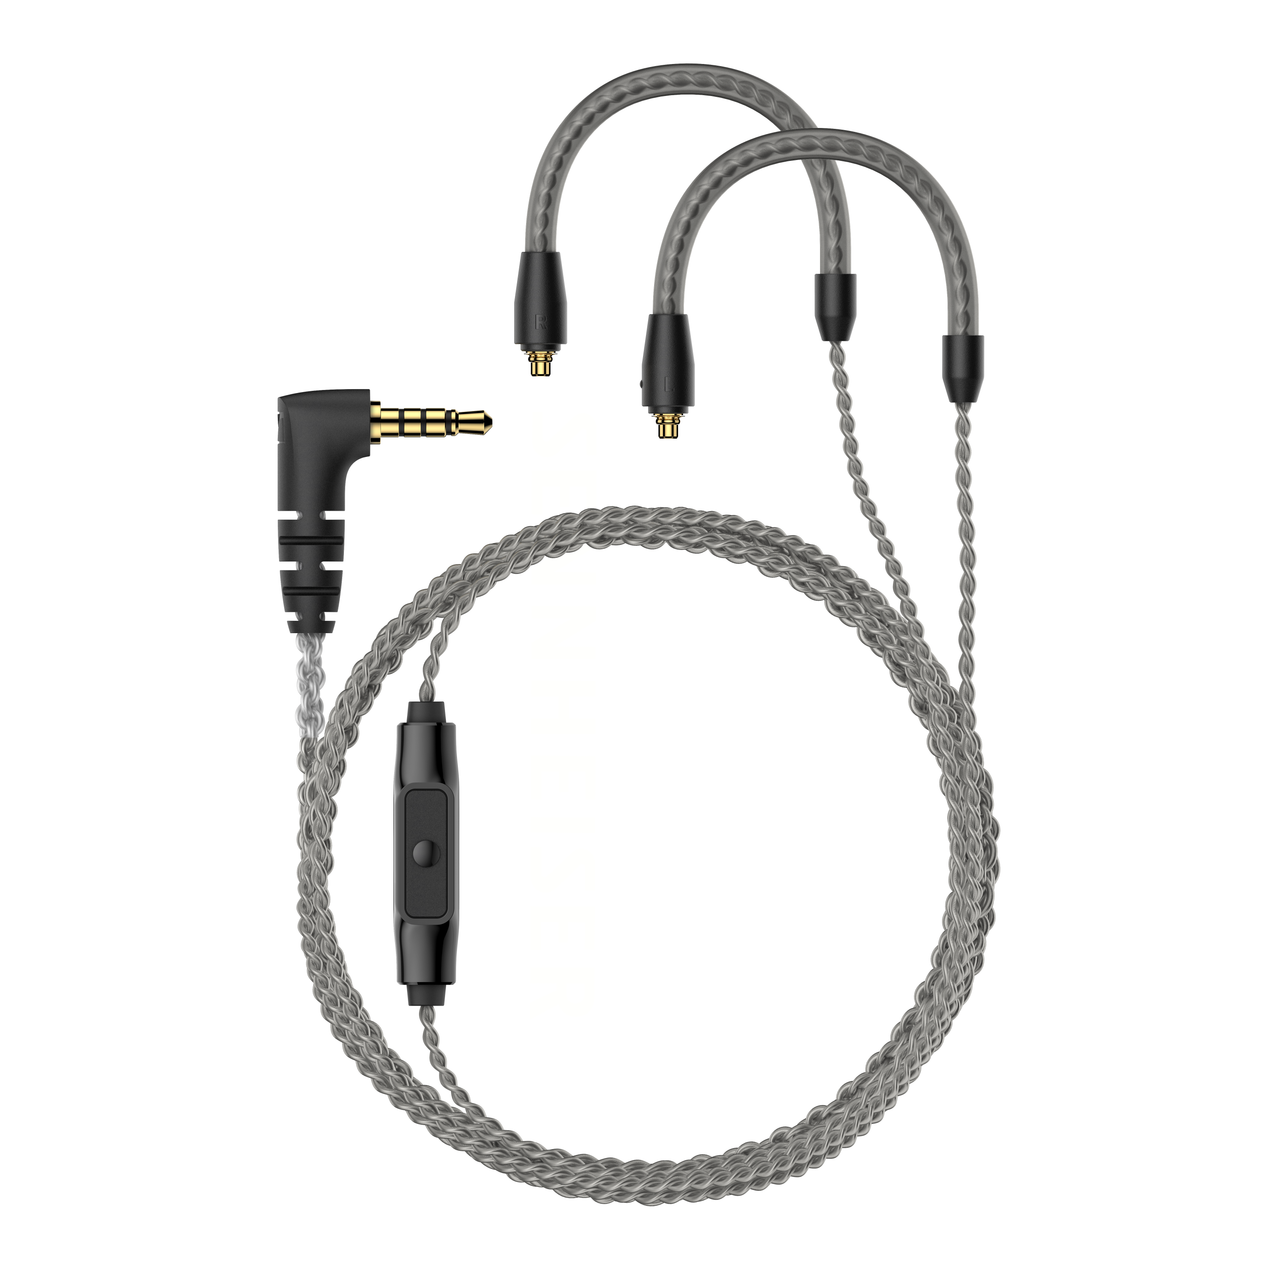 MMCX Cable with MIC 3.5mm 플러그